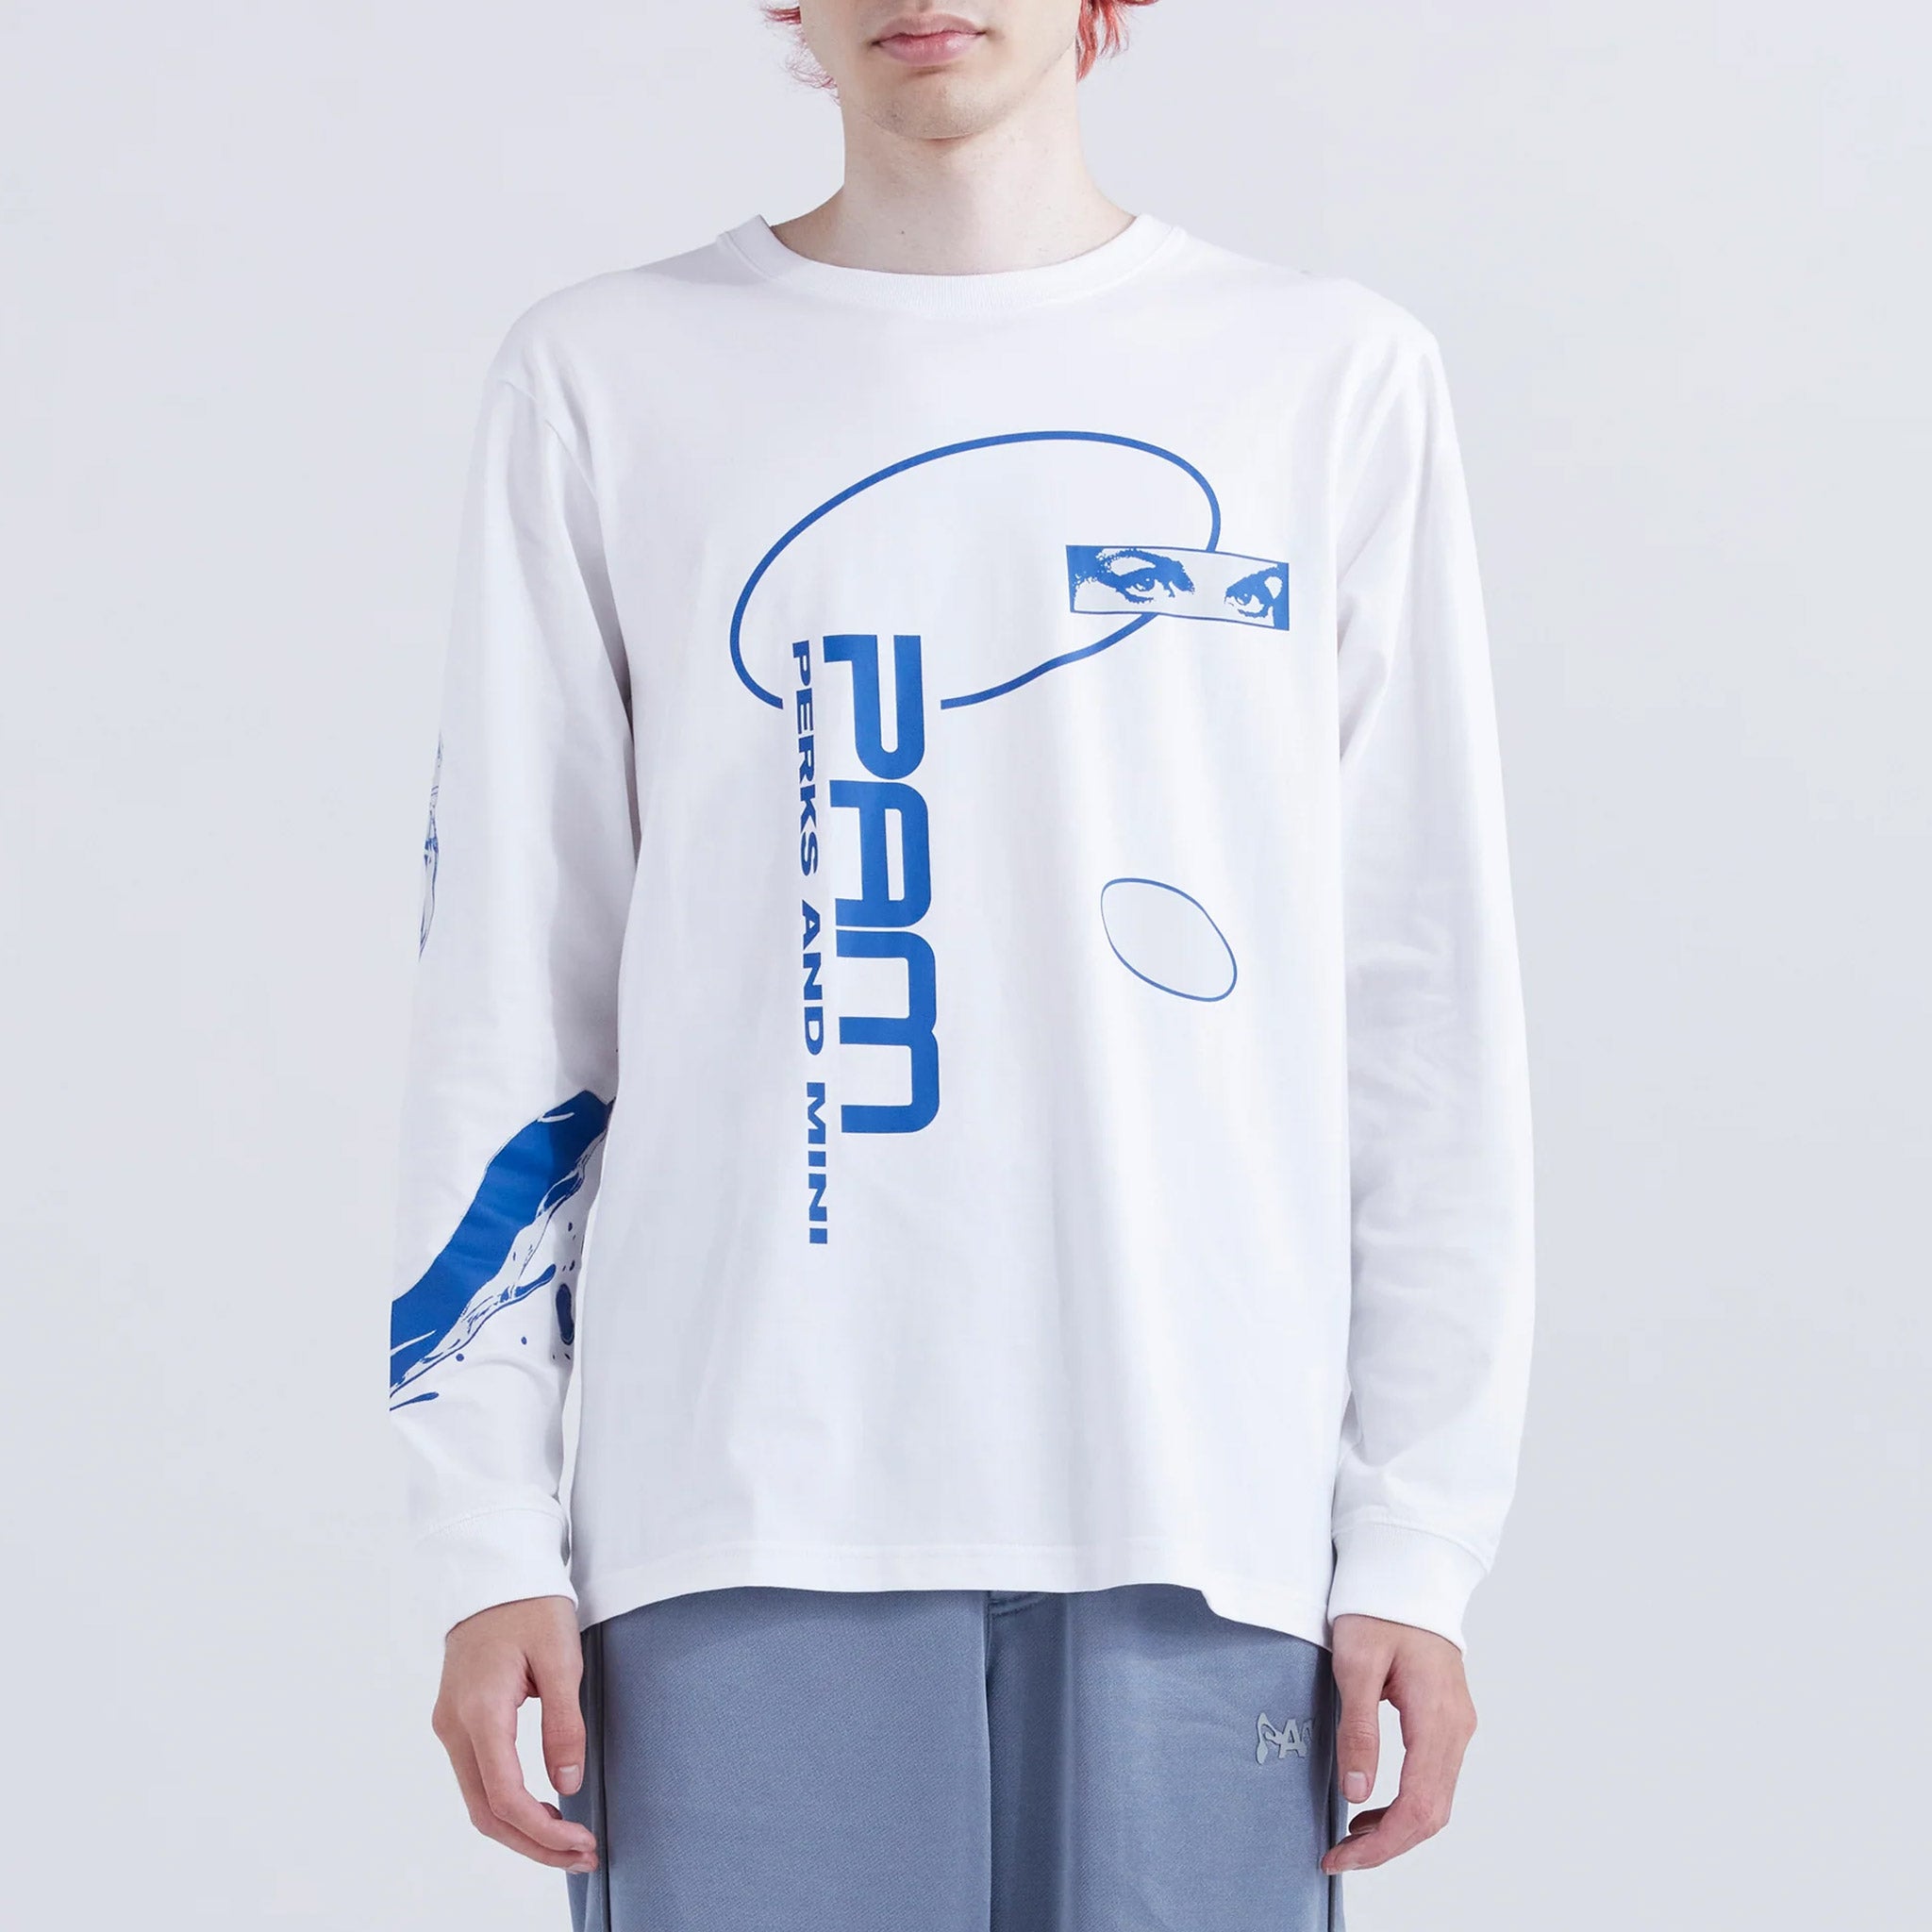 A model wears a white longsleeve cotton graphic tee with a blue PAM logo graphic printed on the front and a liquid graphic on the right sleeve.